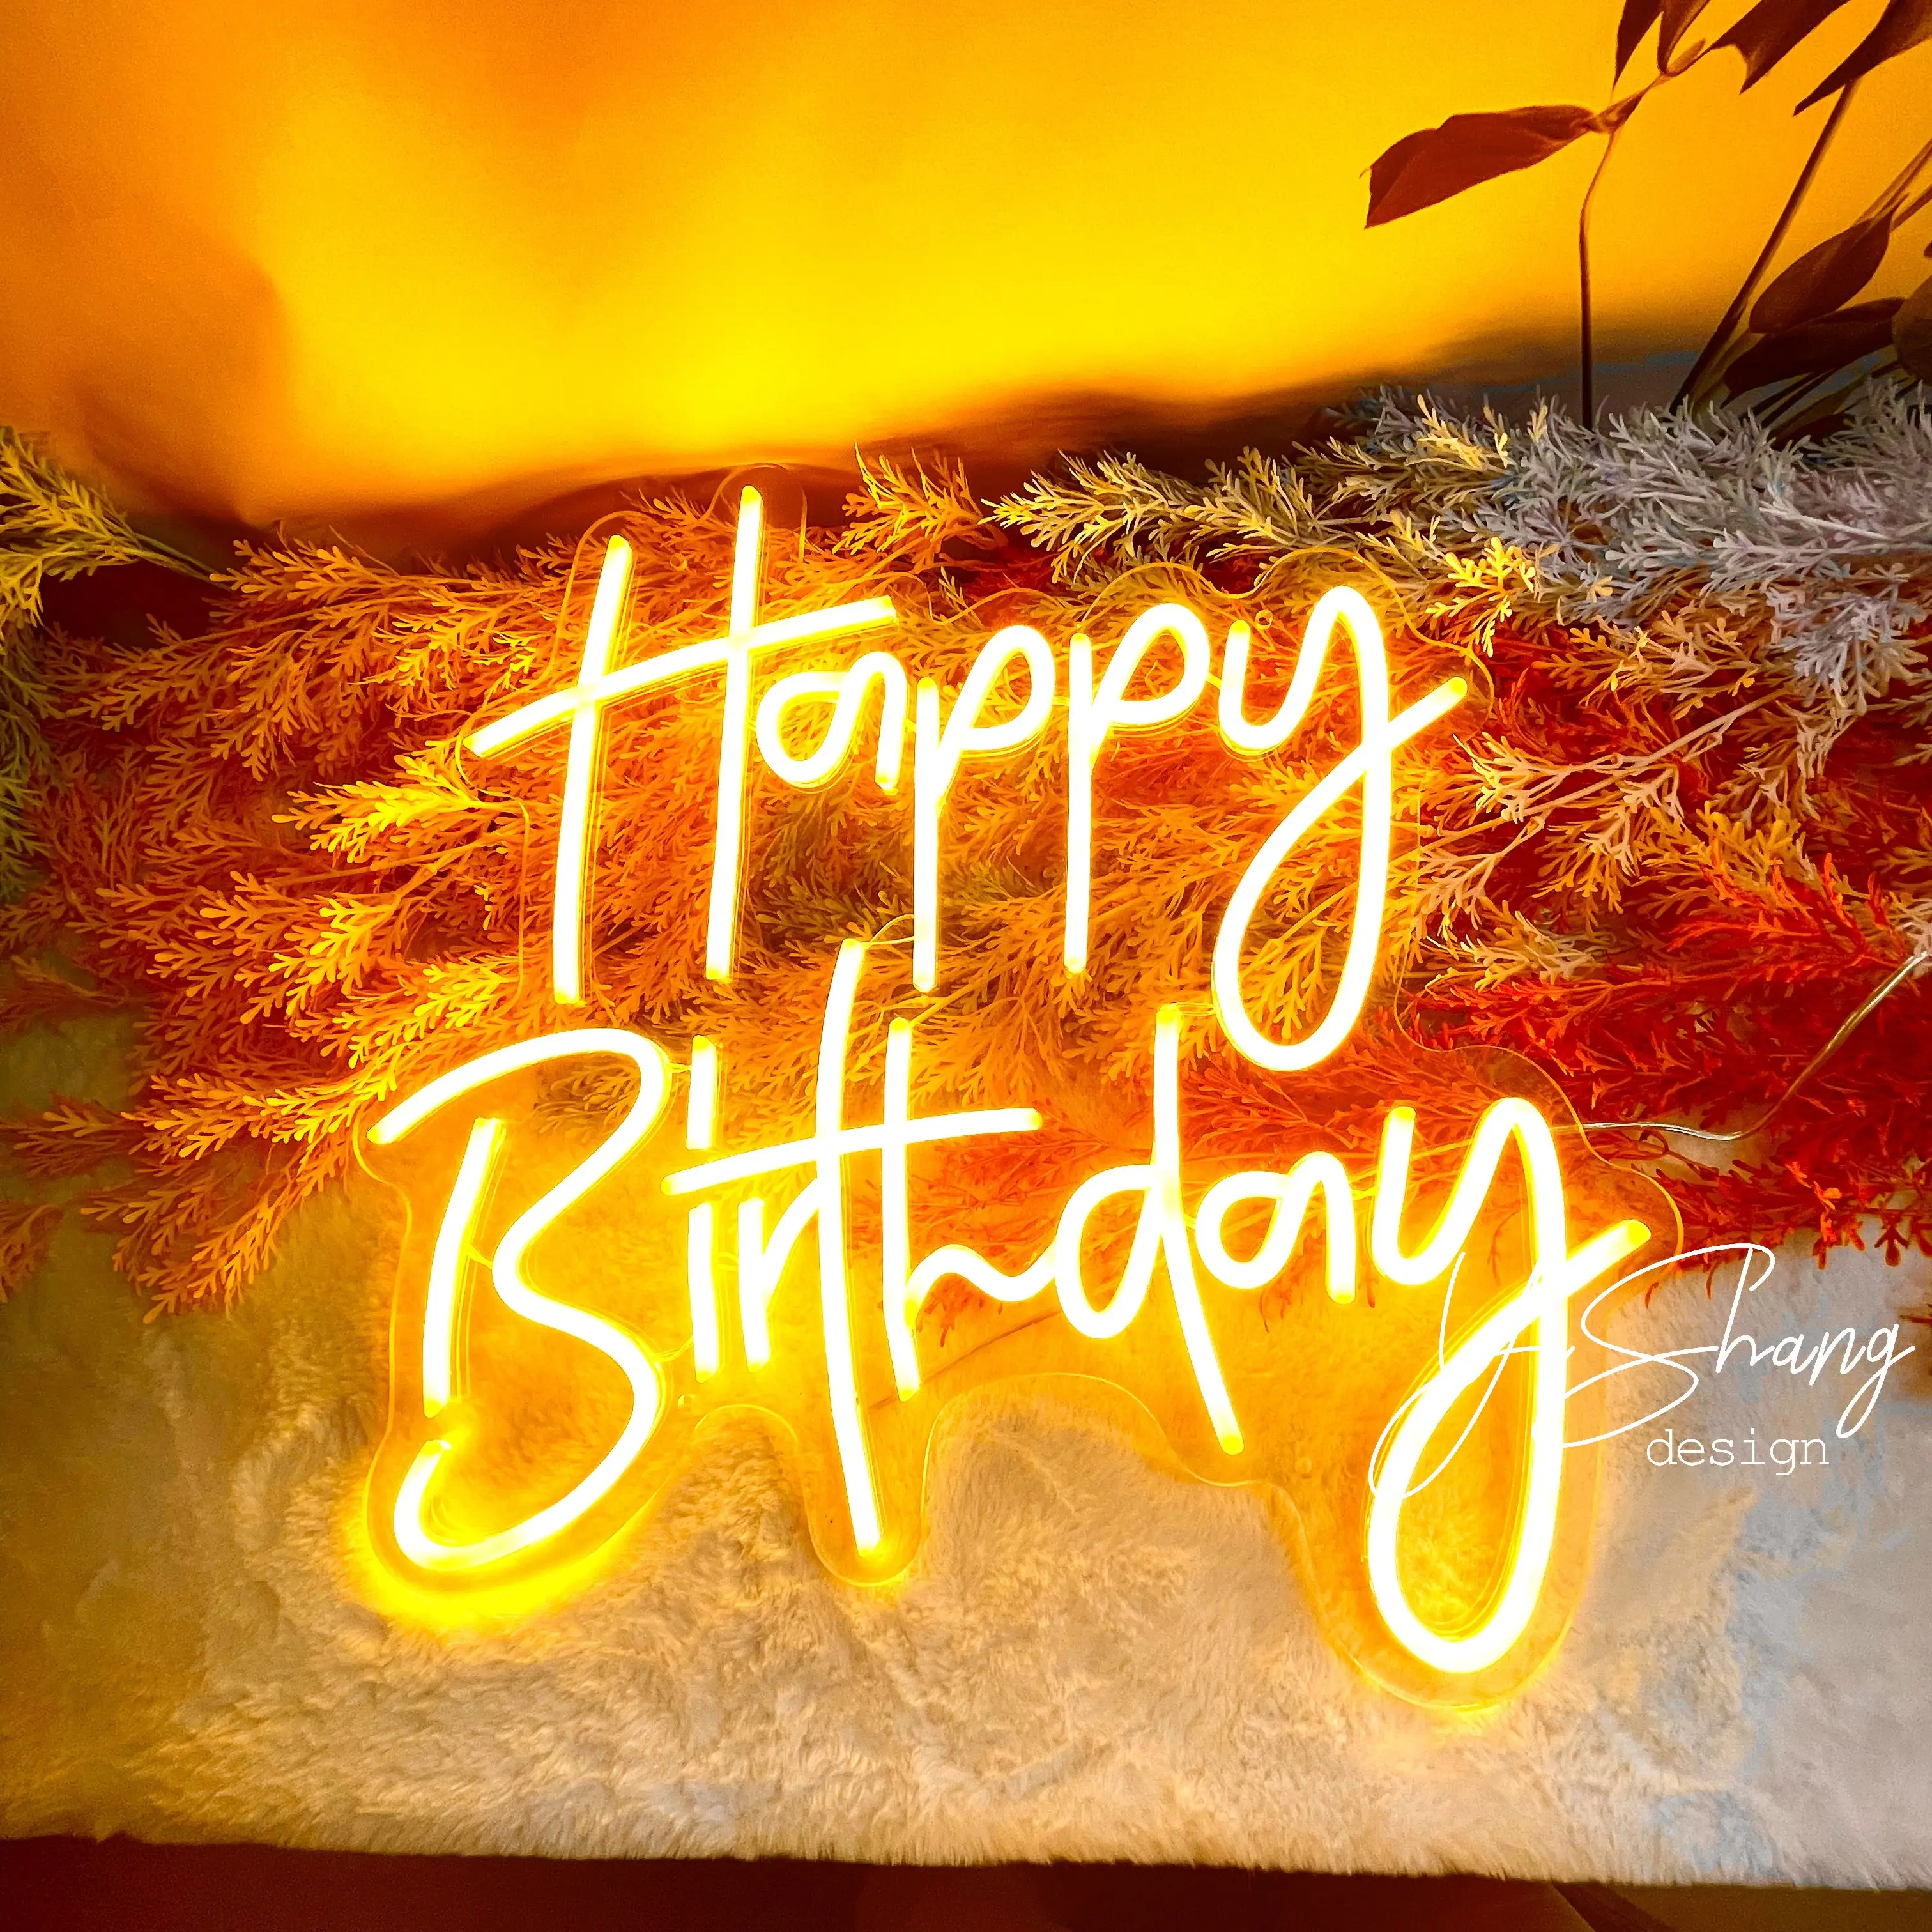 Happy Birthday Neon Lights, Birthday Party Sign, LED Night Light, Home Room Wall Decoration,Party Event Decor